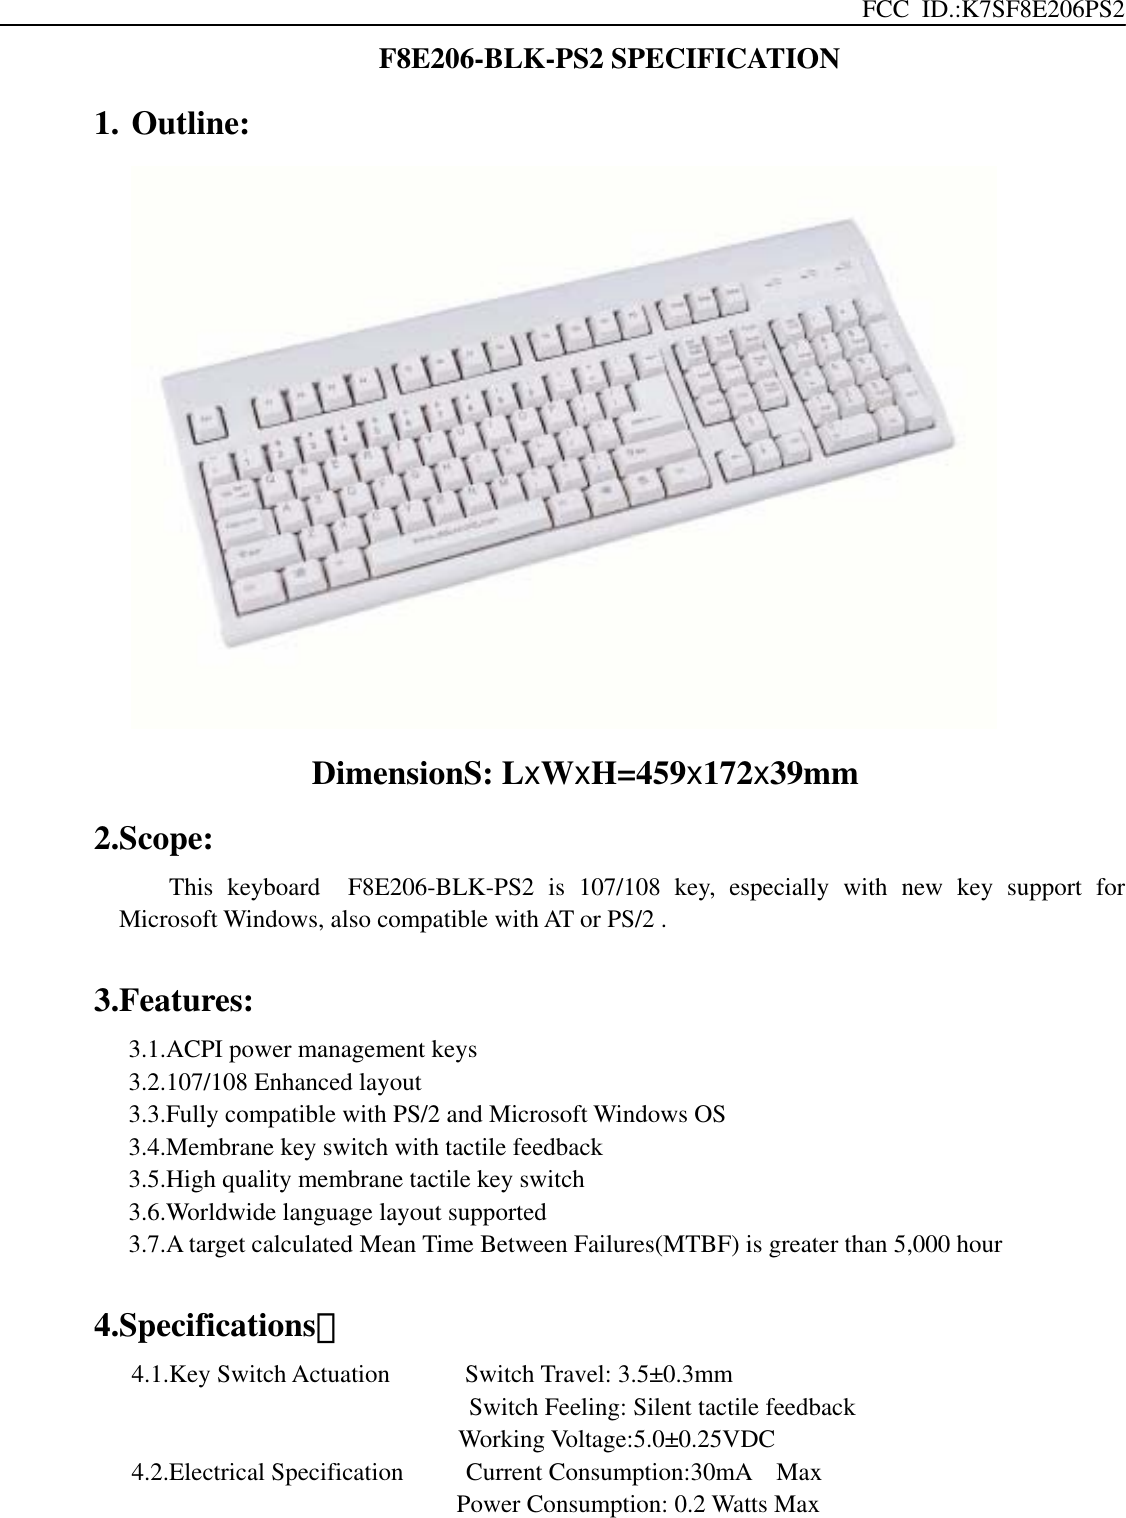 FCC ID.:K7SF8E206PS2 F8E206-BLK-PS2 SPECIFICATION 1. Outline:               DimensionS: LxWxH=459x172x39mm 2.Scope: This keyboard  F8E206-BLK-PS2 is 107/108 key, especially with new key support for Microsoft Windows, also compatible with AT or PS/2 .  3.Features: 3.1.ACPI power management keys 3.2.107/108 Enhanced layout   3.3.Fully compatible with PS/2 and Microsoft Windows OS 3.4.Membrane key switch with tactile feedback 3.5.High quality membrane tactile key switch 3.6.Worldwide language layout supported 3.7.A target calculated Mean Time Between Failures(MTBF) is greater than 5,000 hour  4.Specifications：    4.1.Key Switch Actuation      Switch Travel: 3.5±0.3mm Switch Feeling: Silent tactile feedback Working Voltage:5.0±0.25VDC      4.2.Electrical Specification     Current Consumption:30mA  Max Power Consumption: 0.2 Watts Max   